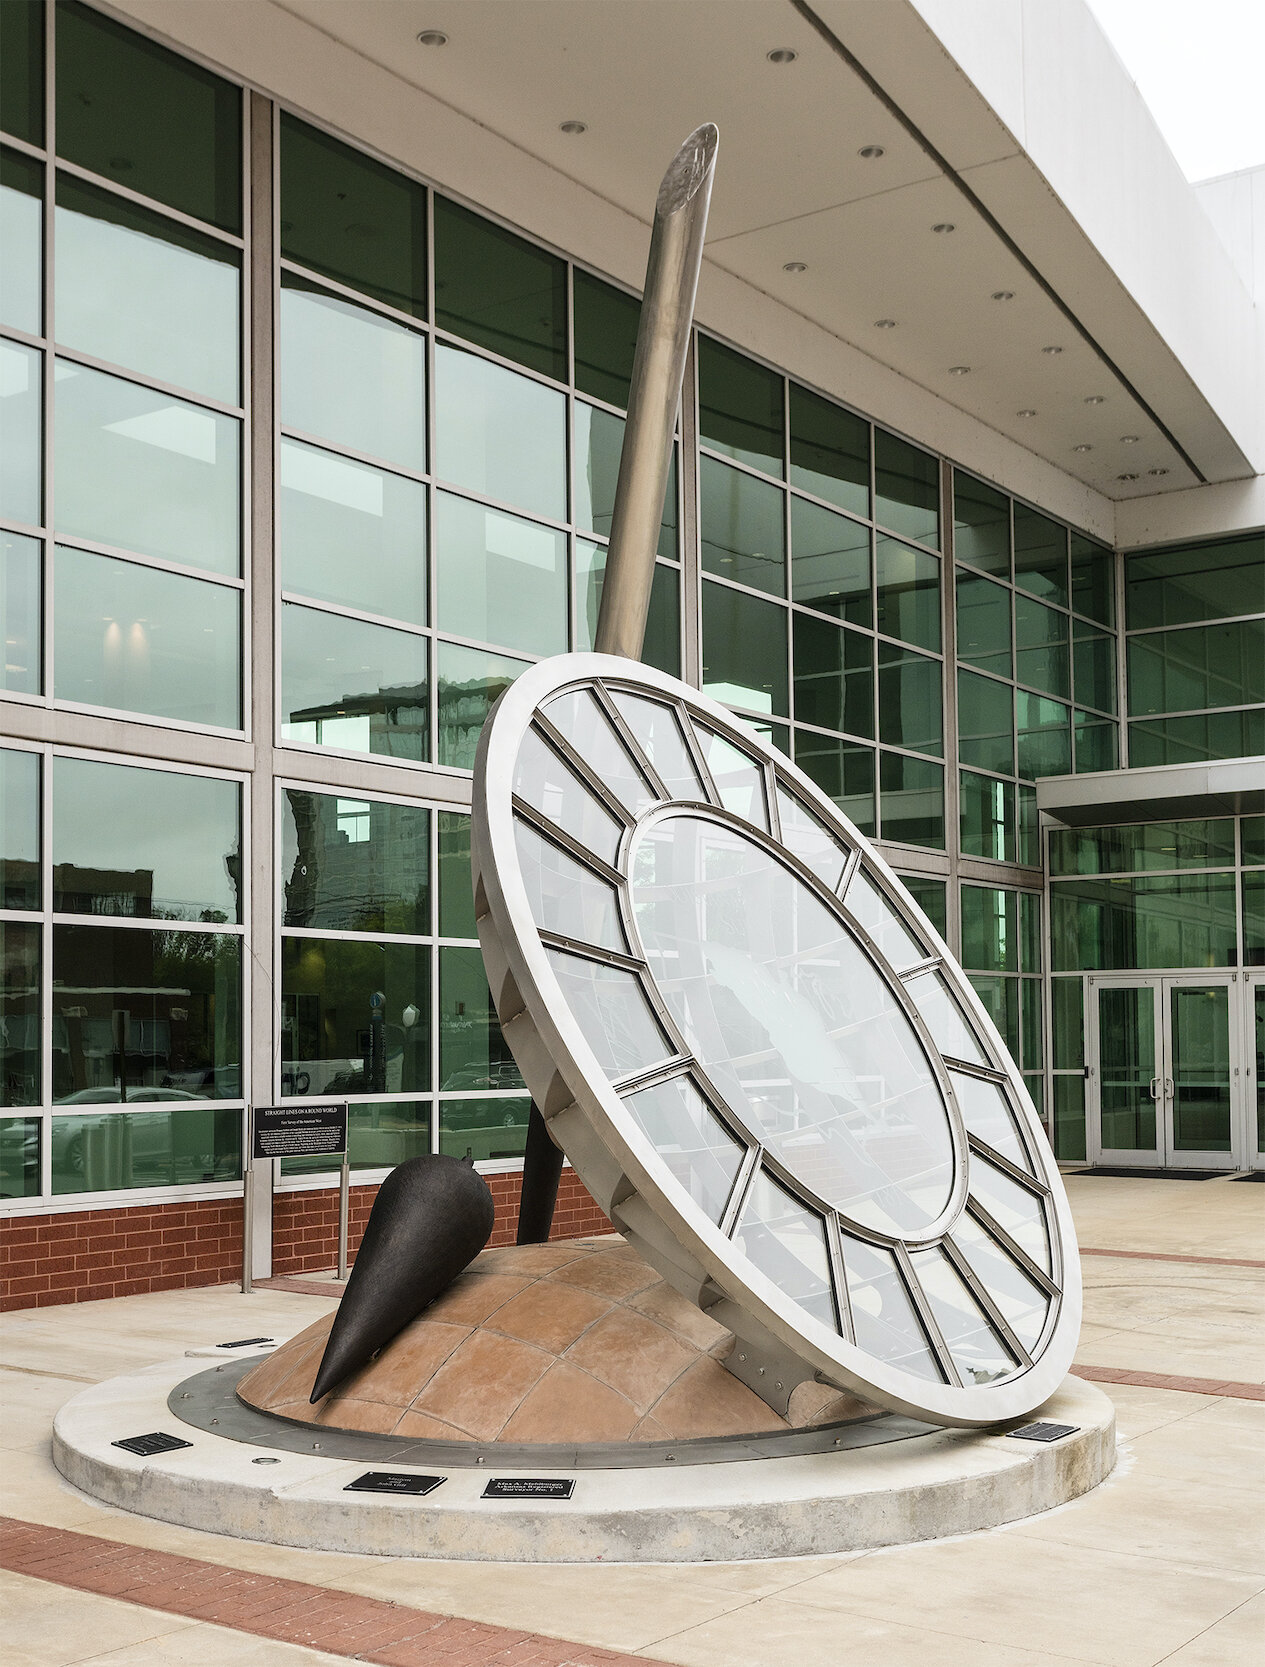   Straight Lines on a Round World , 21’ x 15’ x 15’, stainless steel, tempered glass, cast bronze and concrete, a collaborative with artist Aaron P. Hussey, Little Rock Convention Center, 2017 